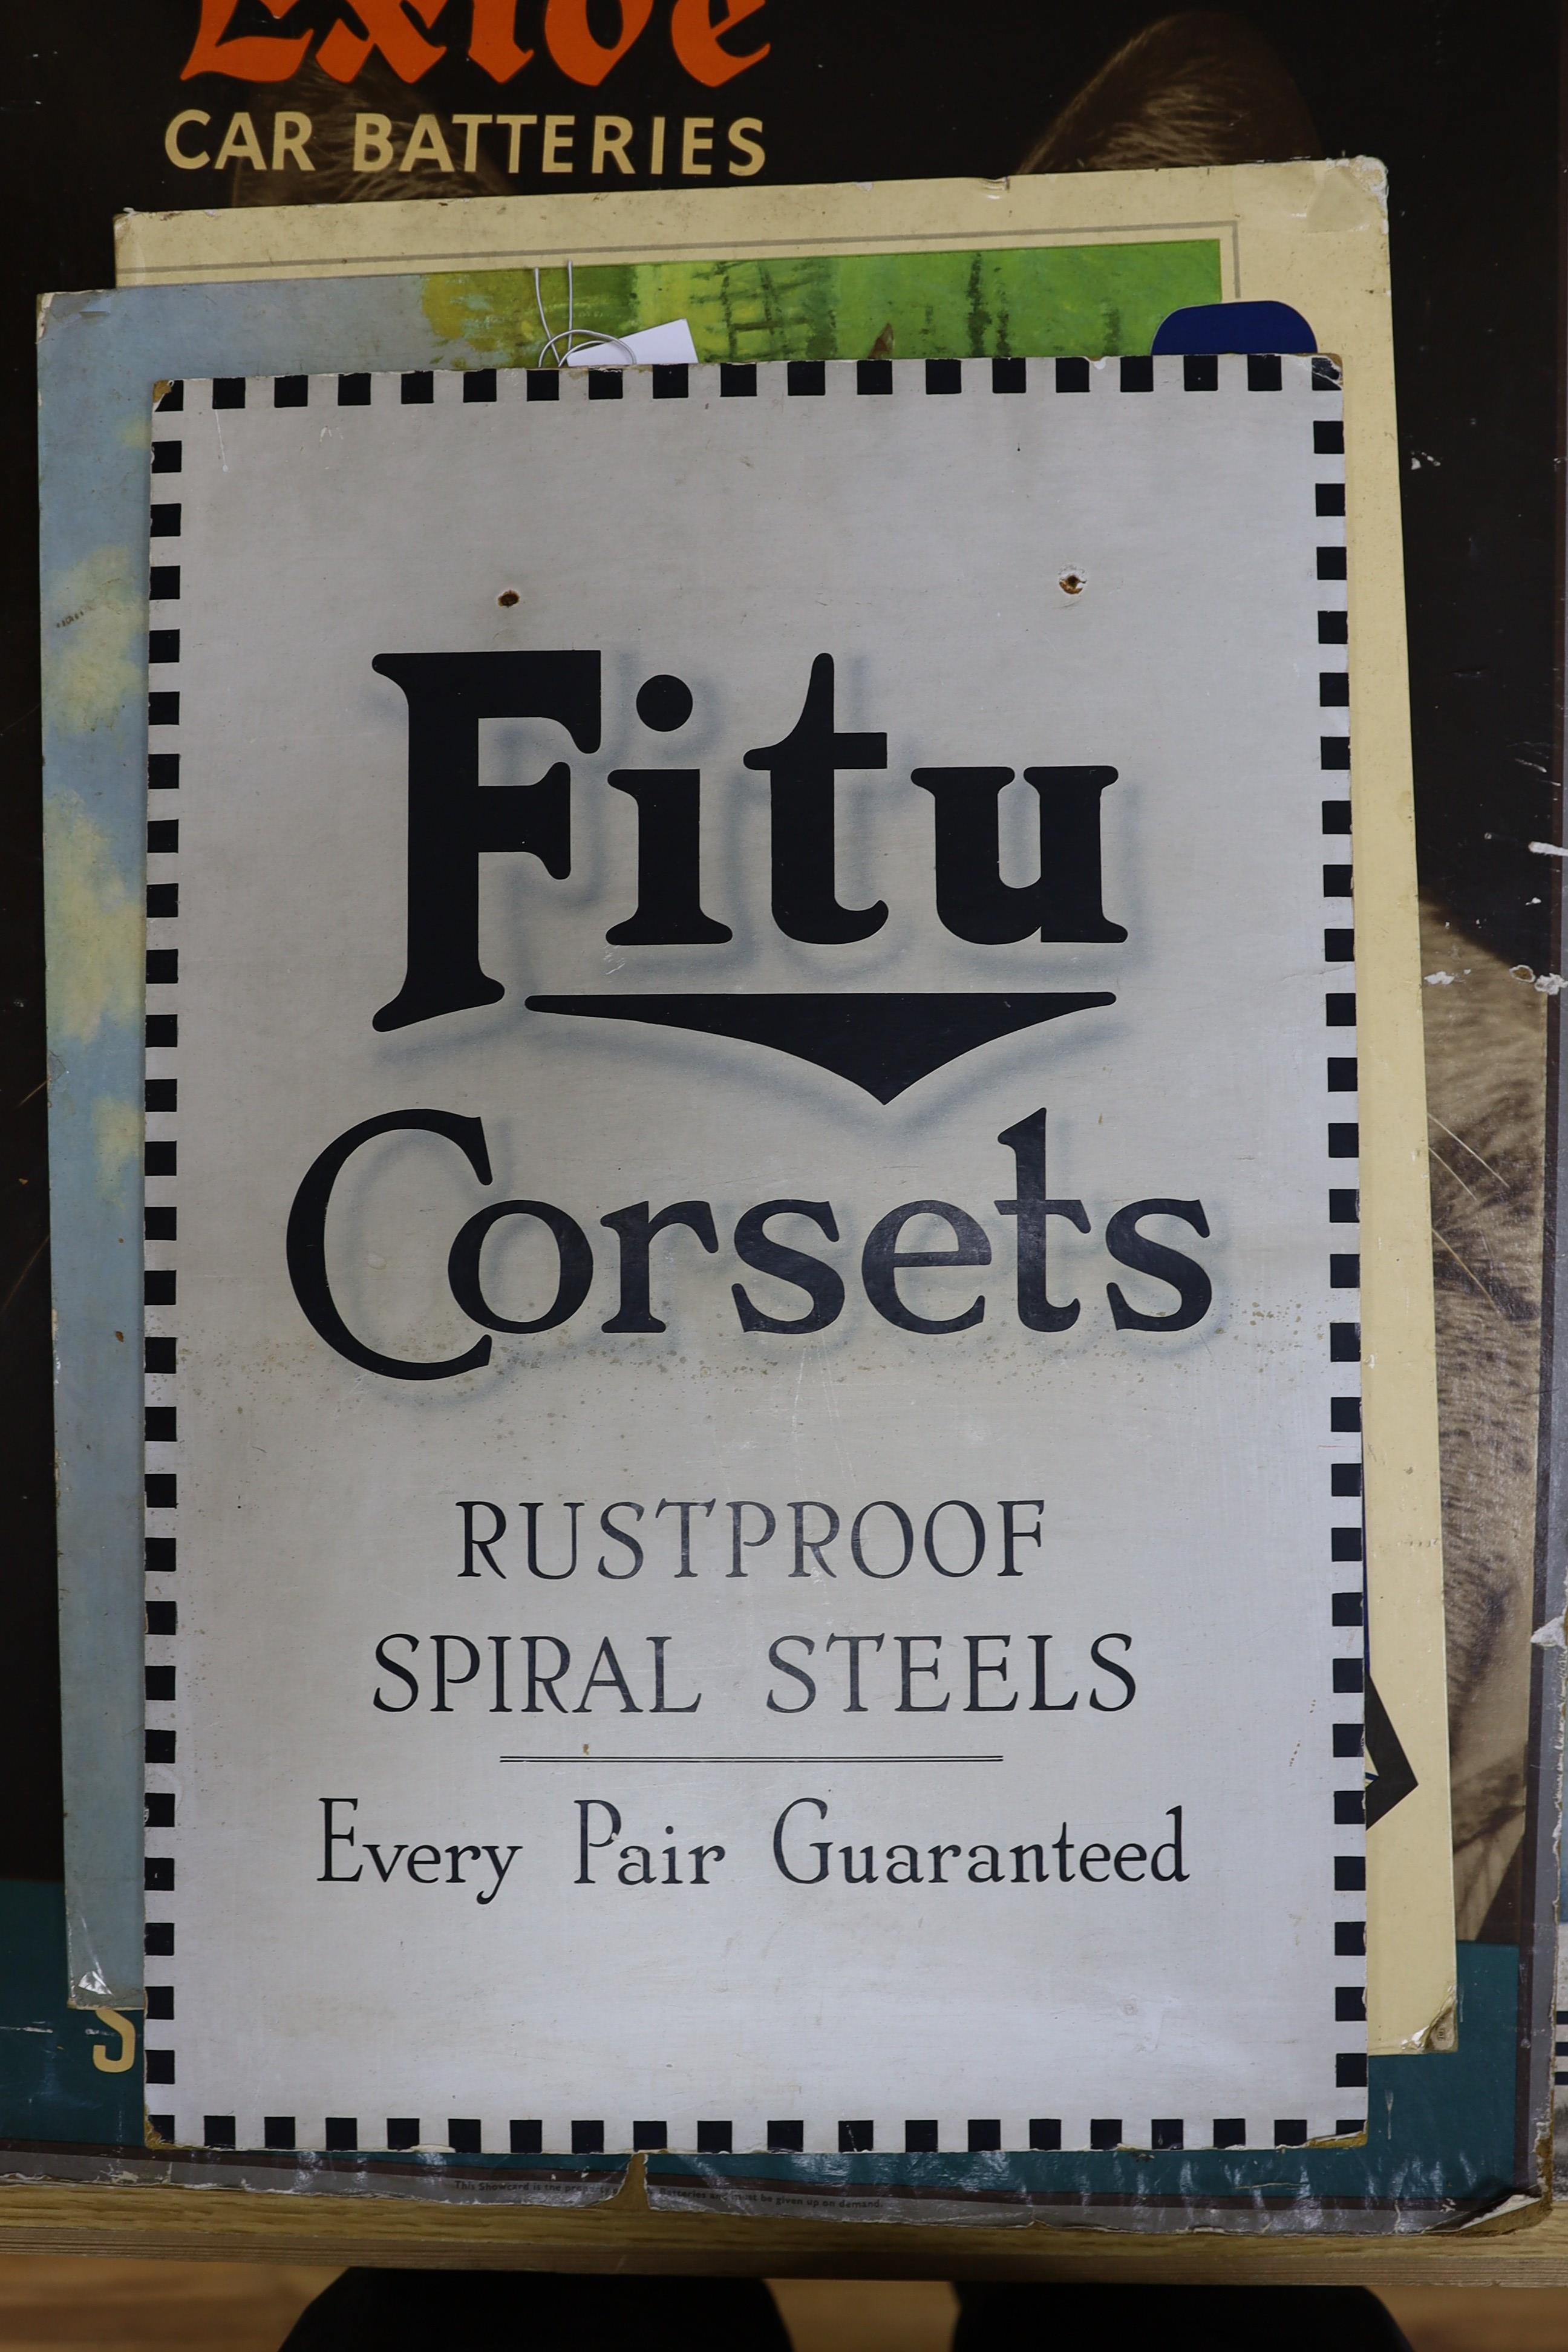 A selection of various shop laminated card advertising signs, to include Ryvita, Fitu Corsets, Player’s Weights etc.